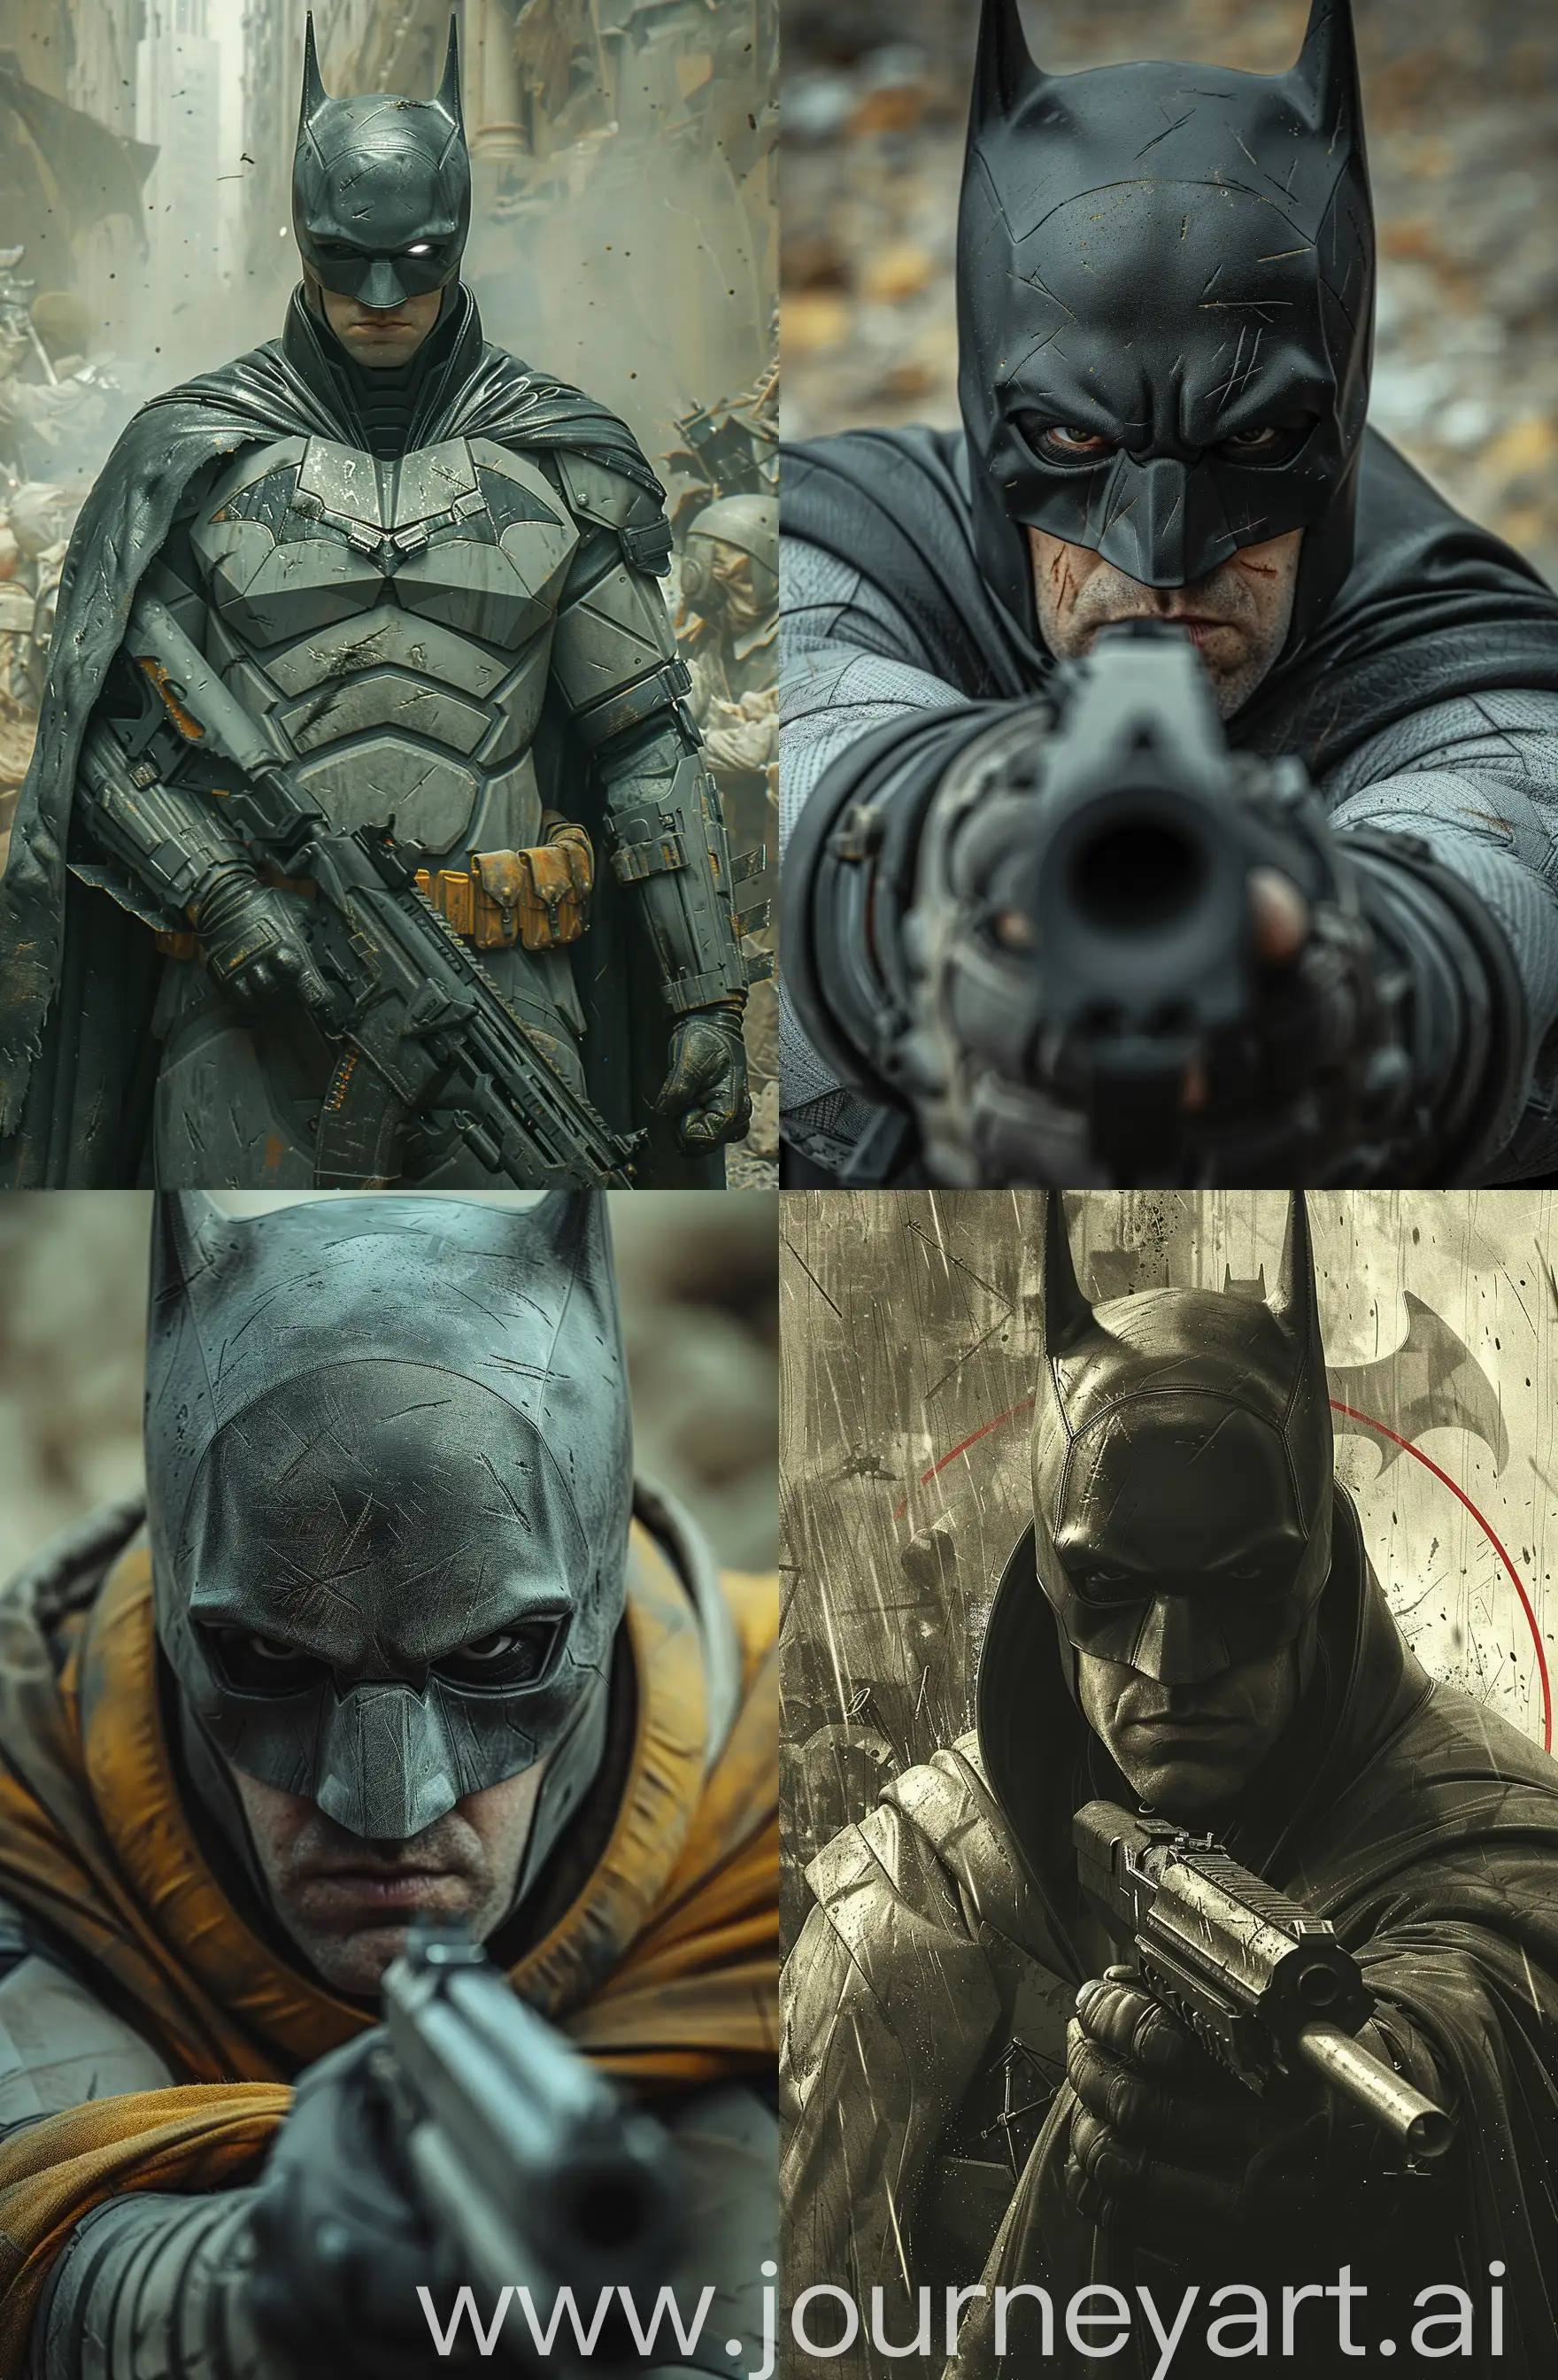 The Batman from 2022 movie has a menacing personality, a costume intended to create a sinister appearance
Batman wears his costume, suggesting a story of survival or combat. It is worth noting that Batman holds a firearm with a focused gaze, which enhances the feeling of threat.
The background behind Batman is unclear and chaotic, with undertones suggesting a post-apocalyptic or war-torn environment. This background completes the hostile image of Batman.
Designed to induce a feeling of unease or to subvert the usual cheerful connotation The combination of the Batman motif and aggressive elements creates a juxtaposition that is often used in various forms of media to elicit a strong emotional response --ar 36:55 --stylize 750 --v 6